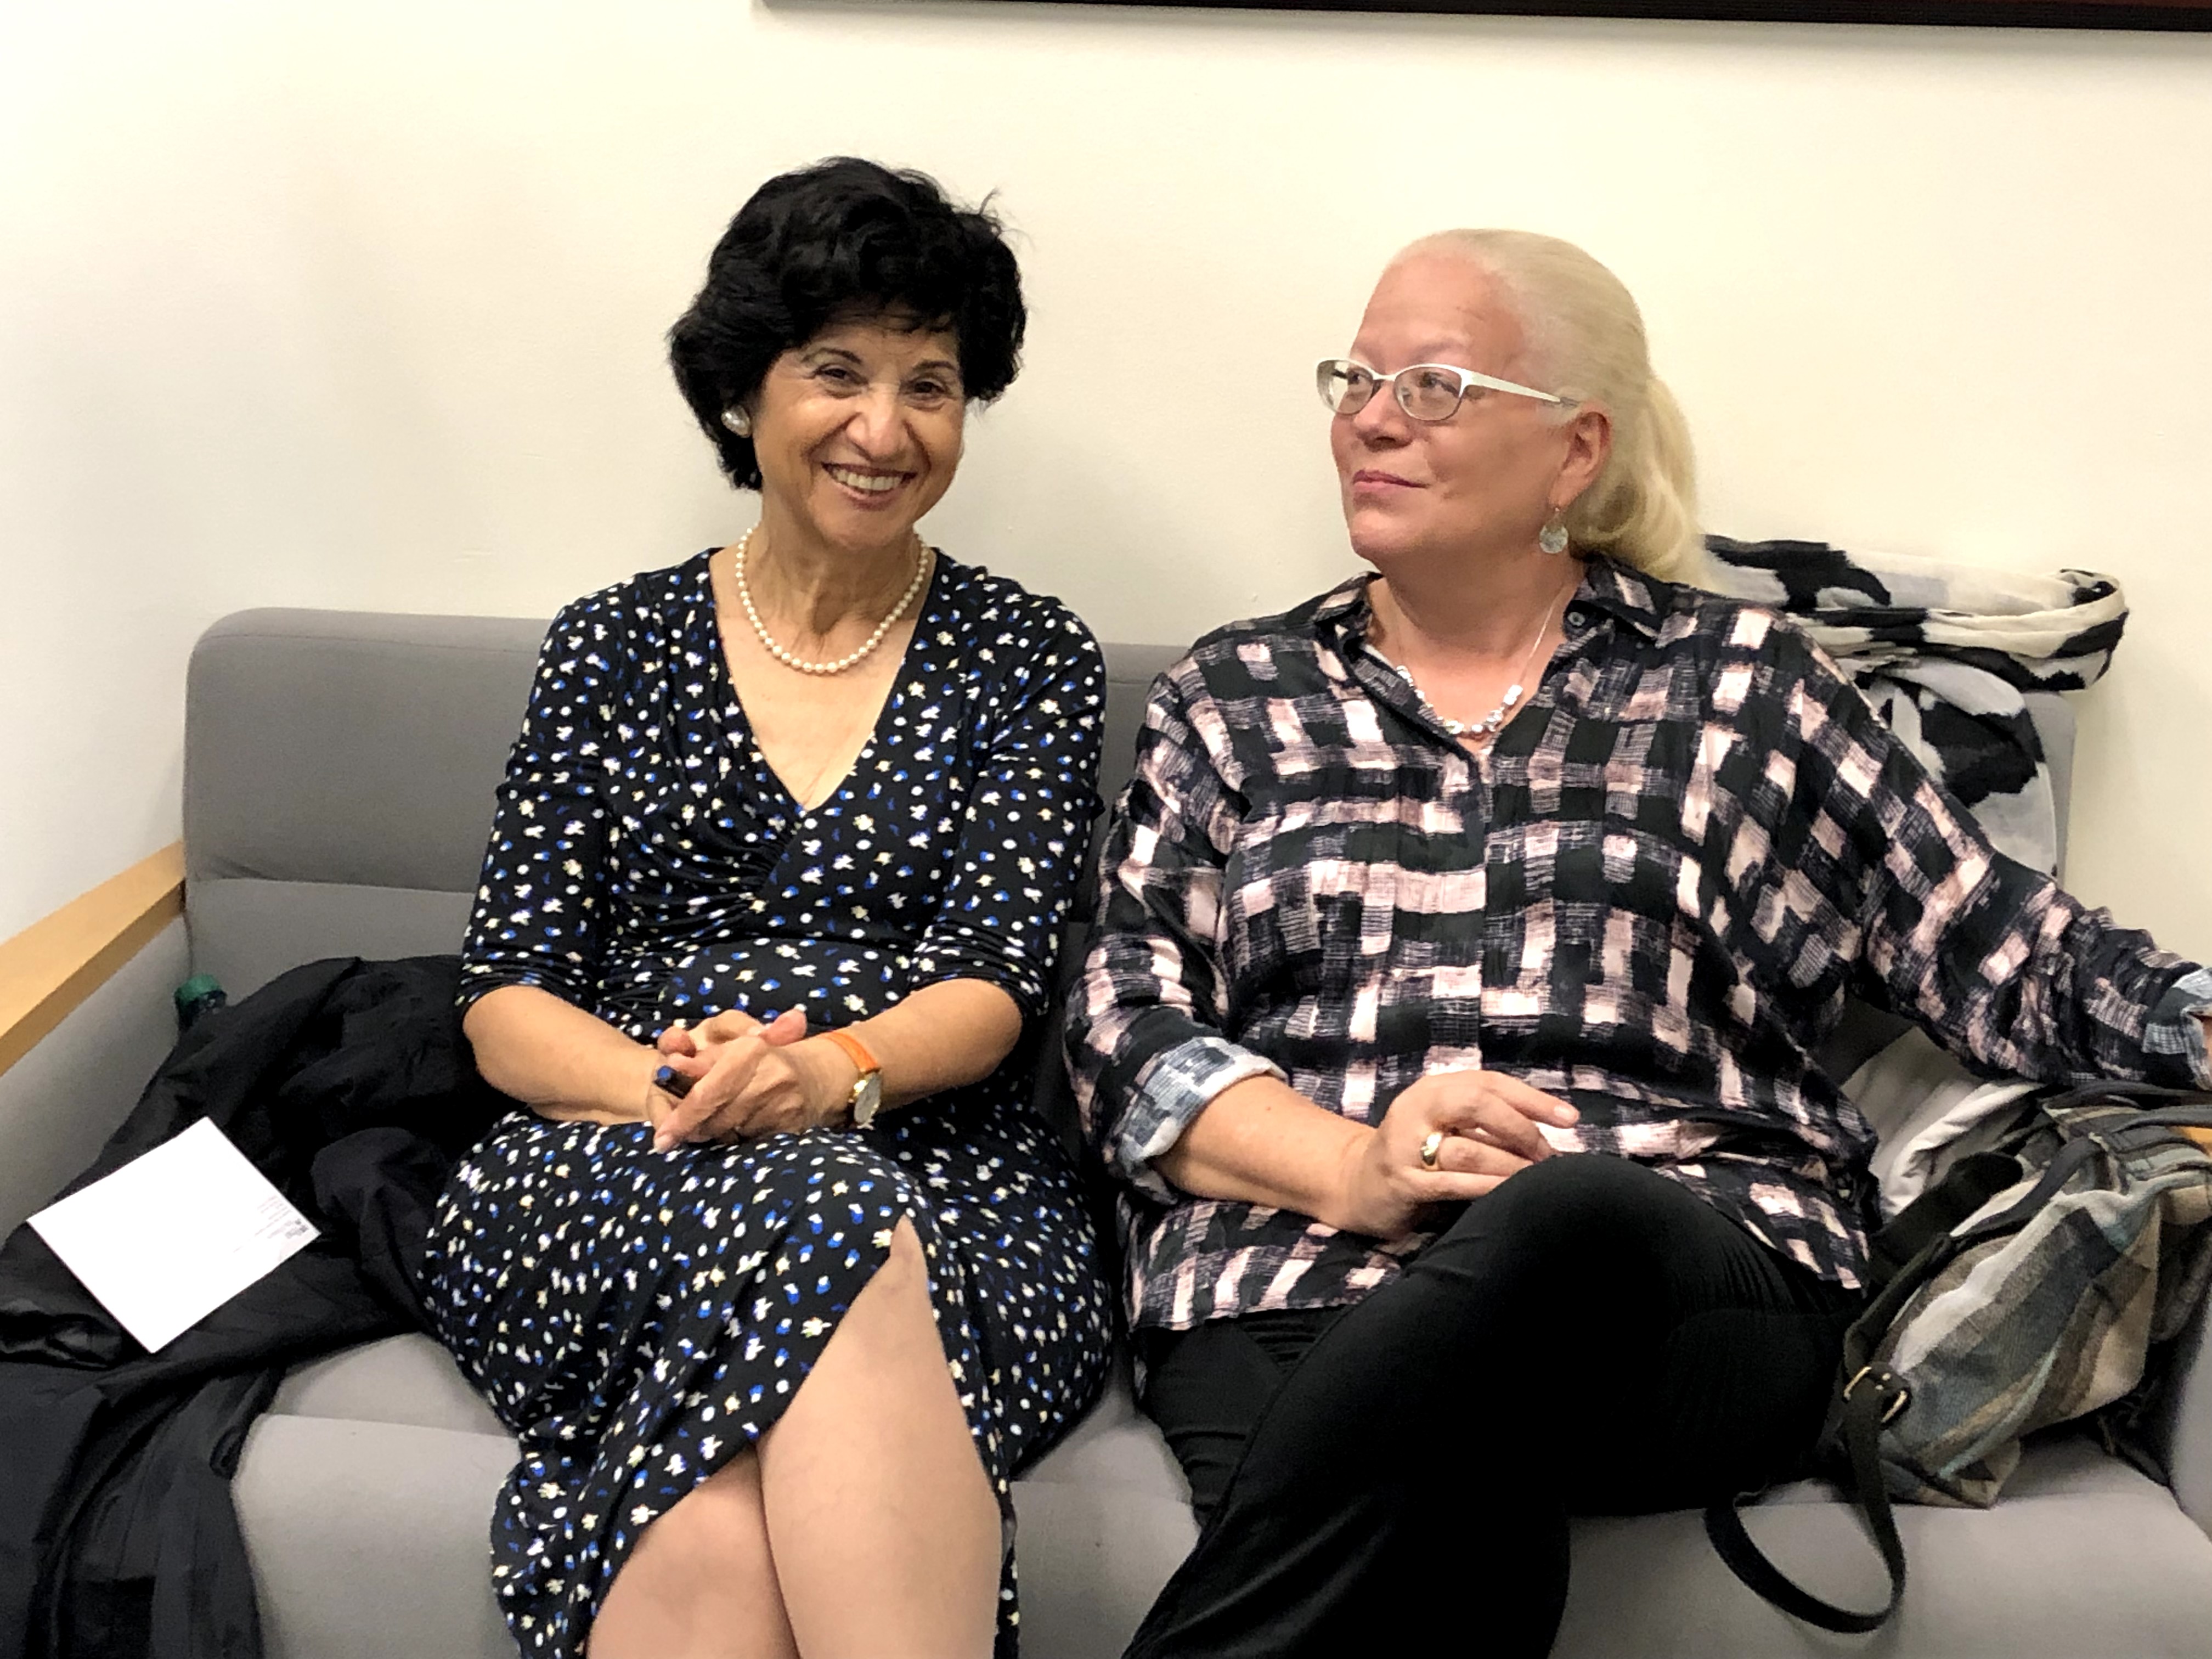 Two people sitting on a gray couch, both with their legs crossed. One faces the camera and smiles, the other looks away at something off camera right.